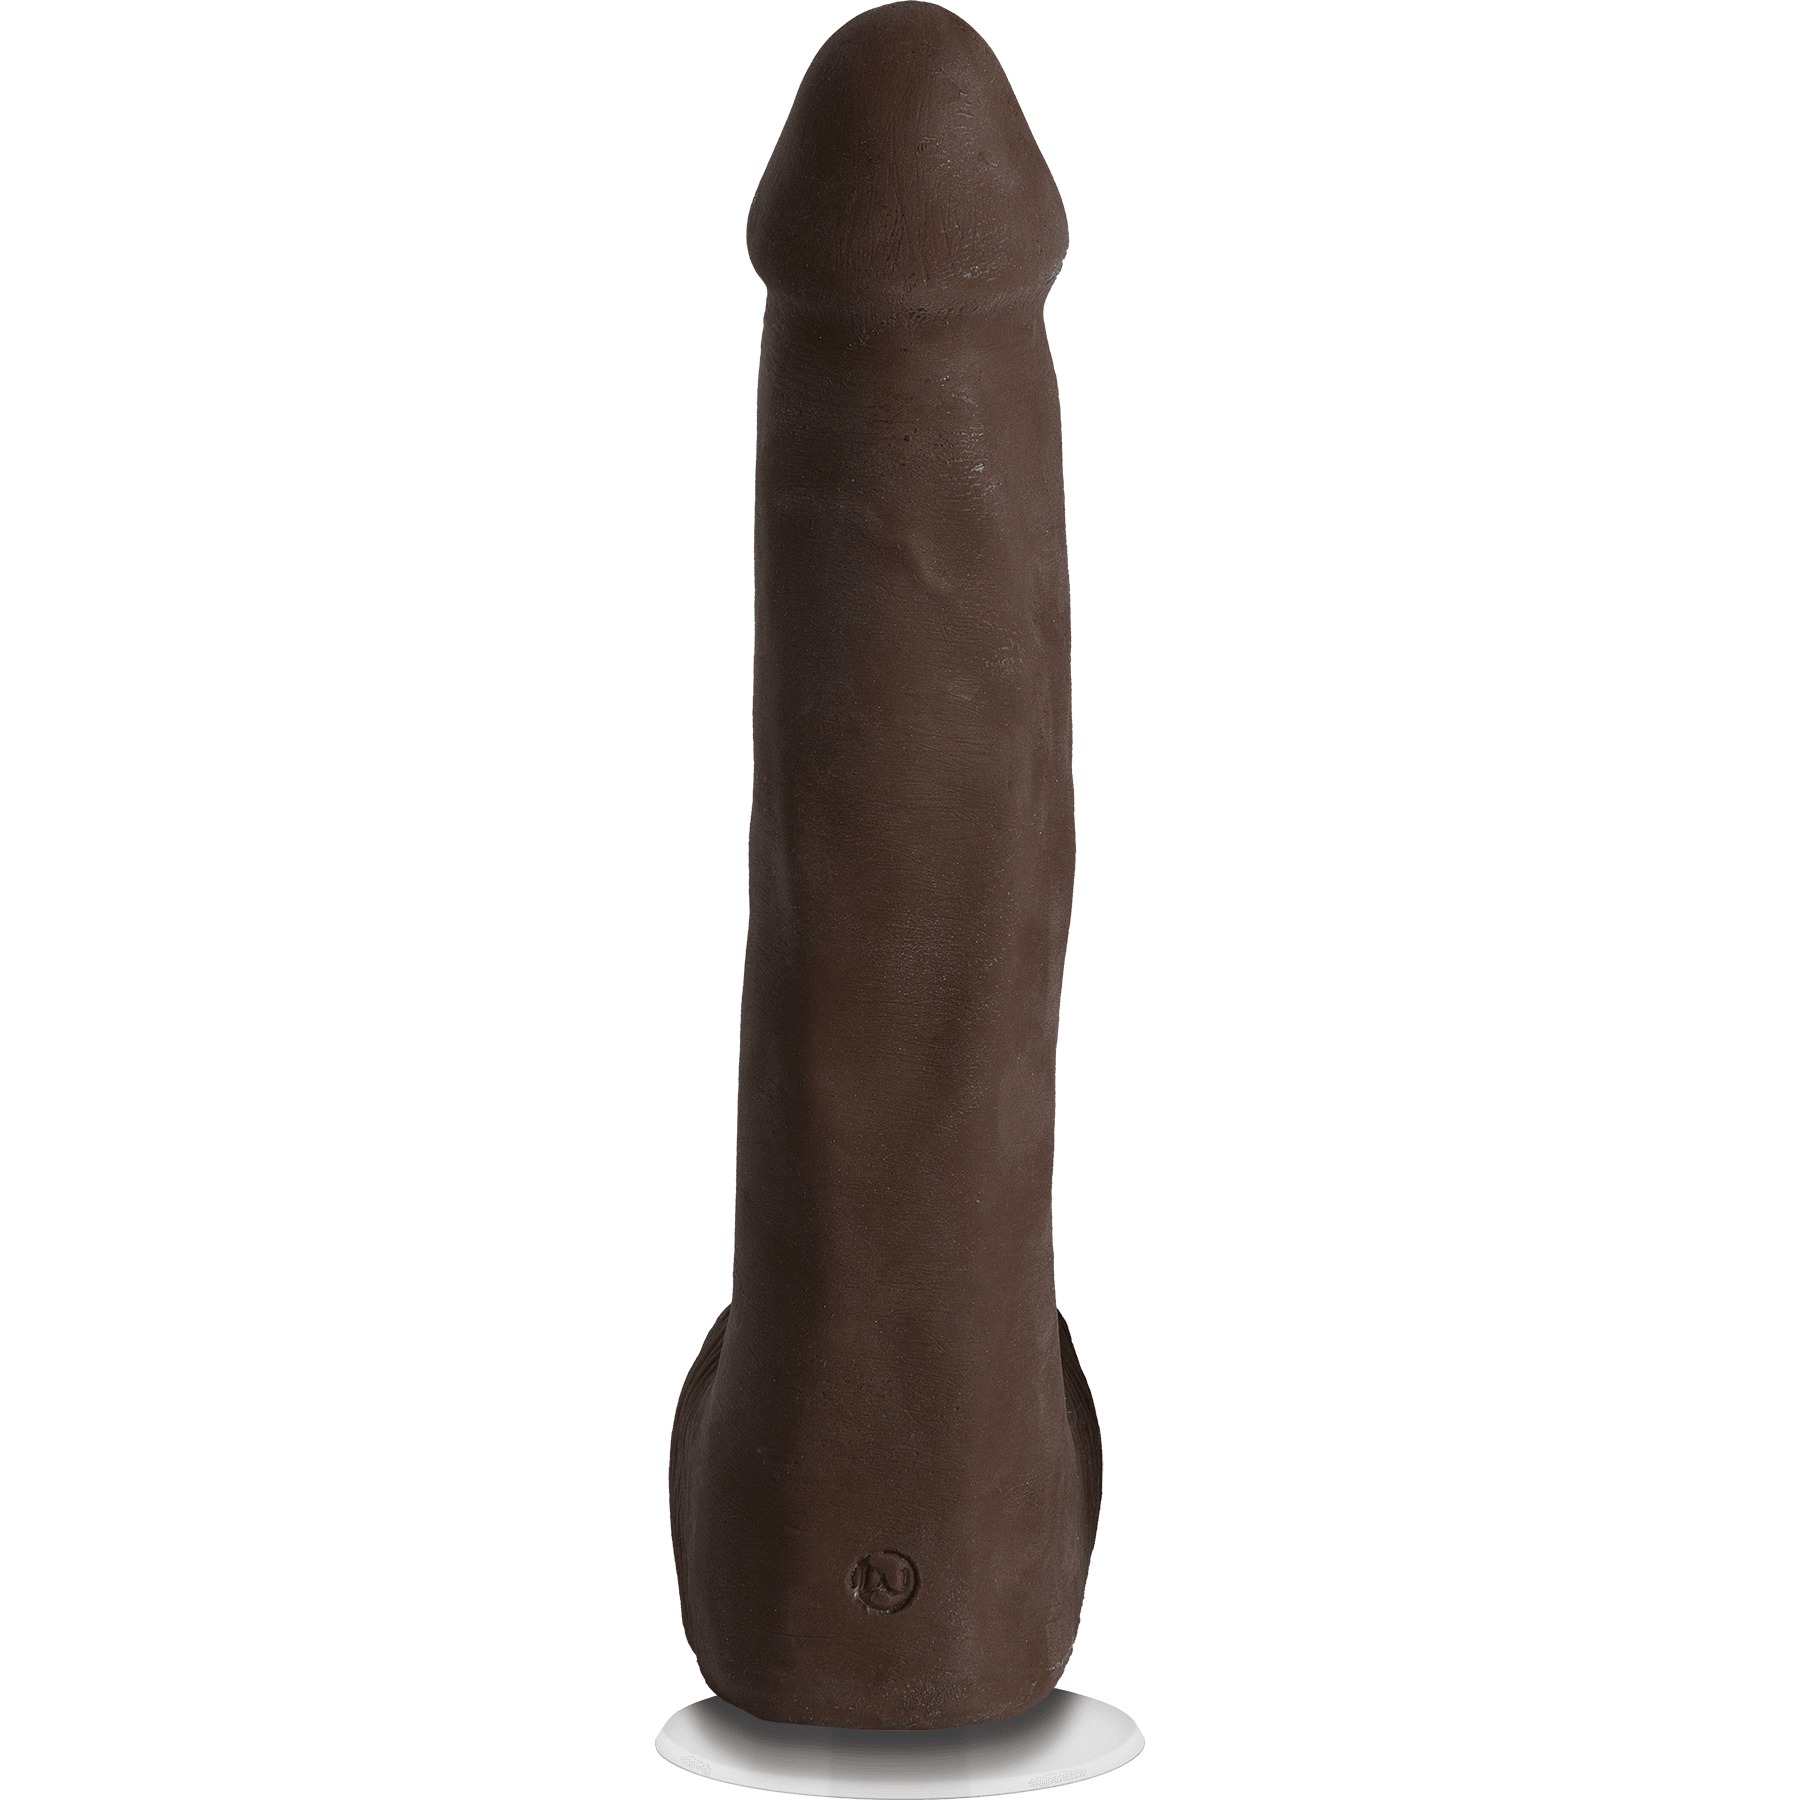 Doc Johnson Signature Cocks Rob Piper Dildo 10.5in Cock - Buy At Luxury Toy X - Free 3-Day Shipping